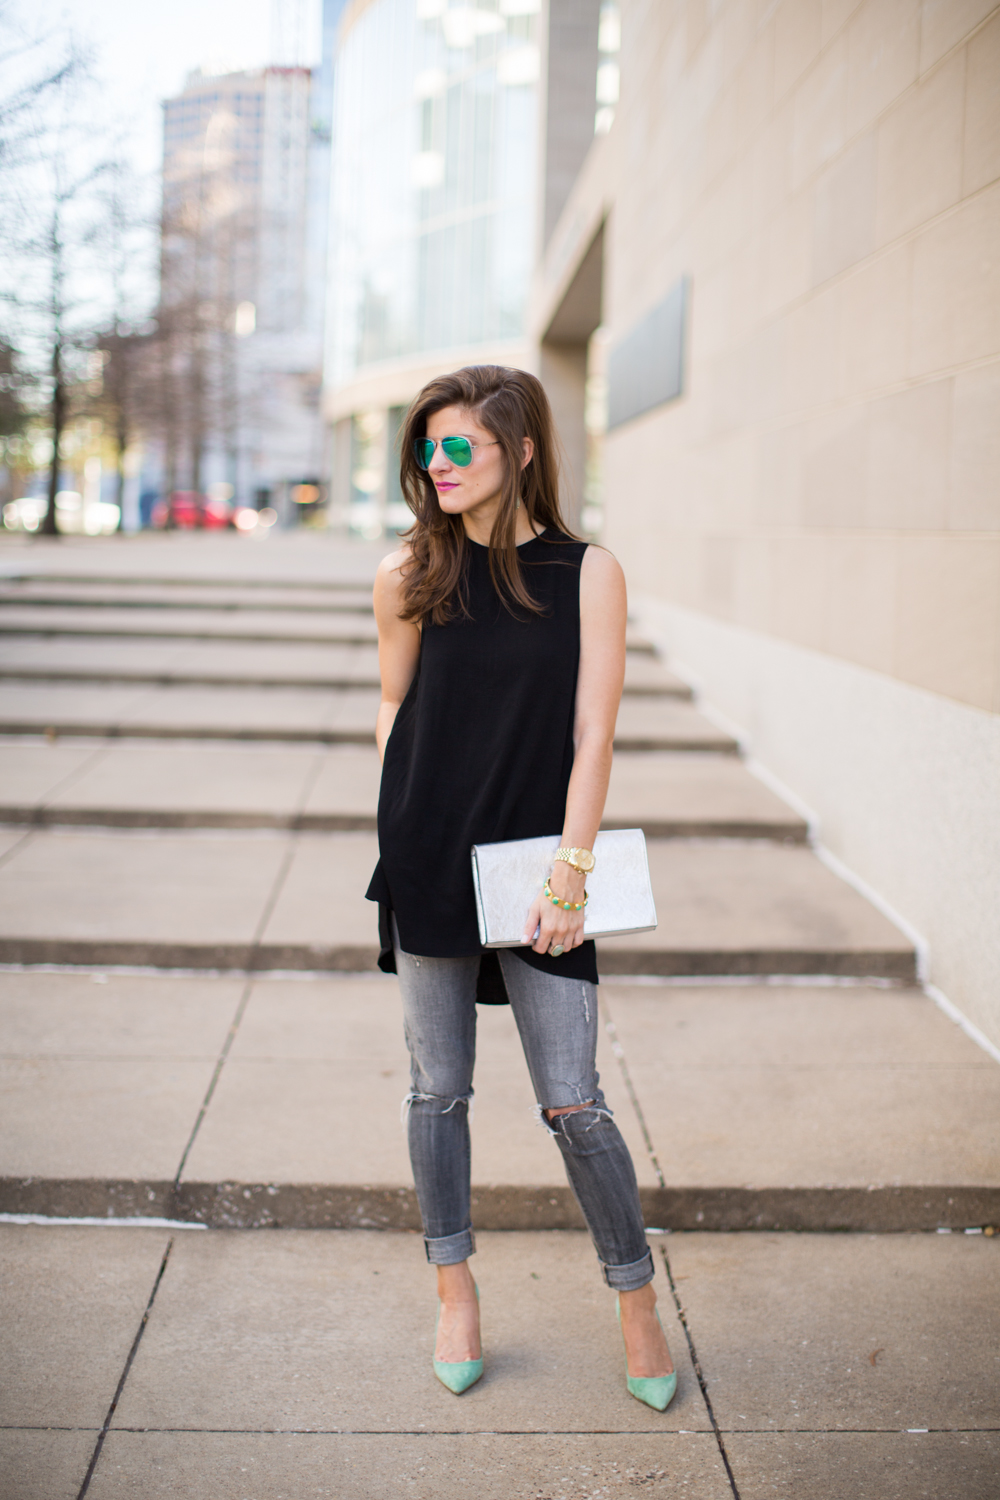 grey jeggings outfit